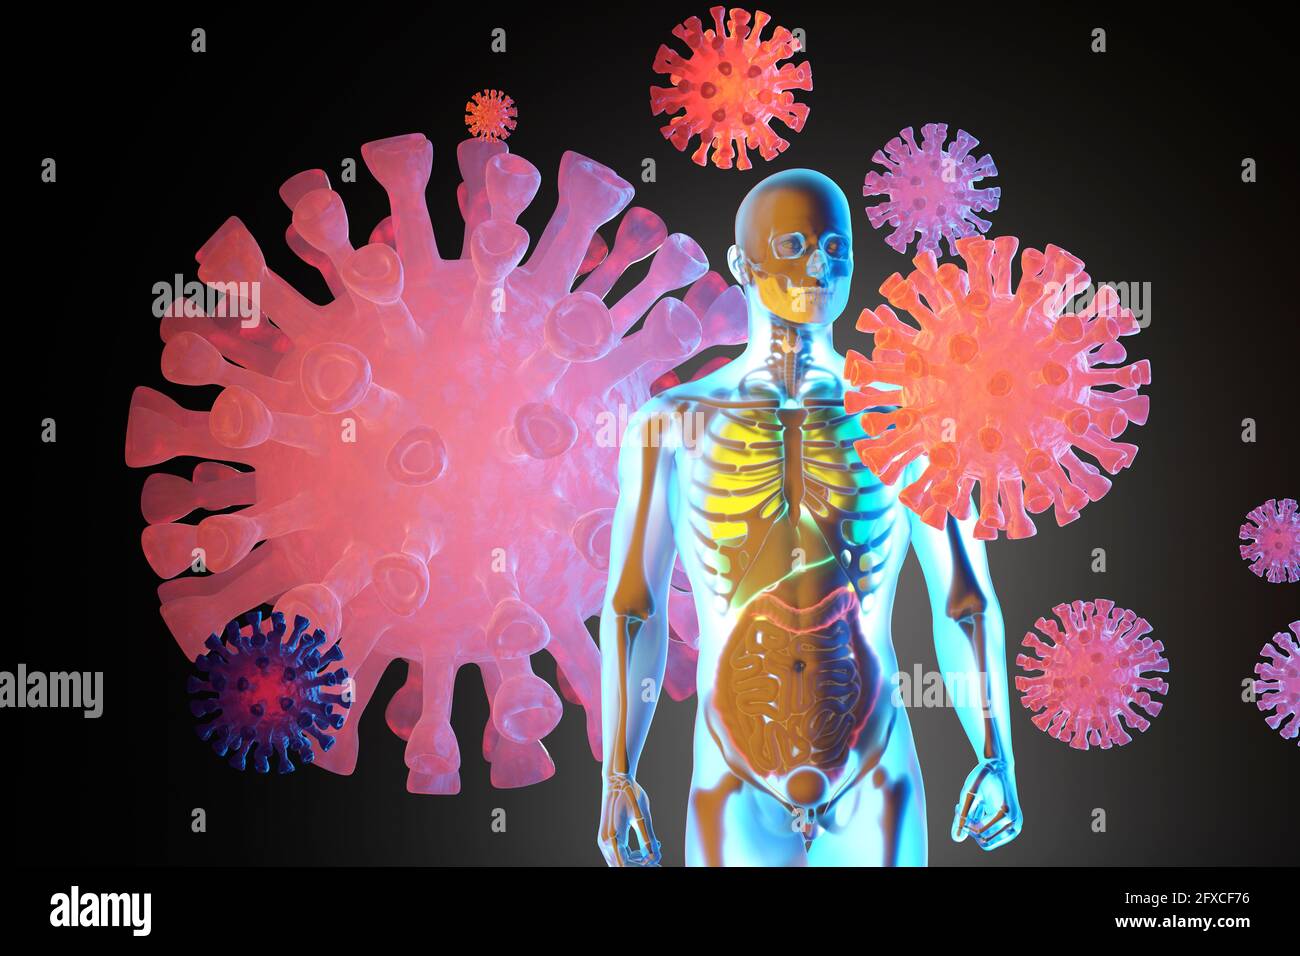 3D Illustration of human anatomy visualisation with skeleton and internal organs surrounded by virus Stock Photo